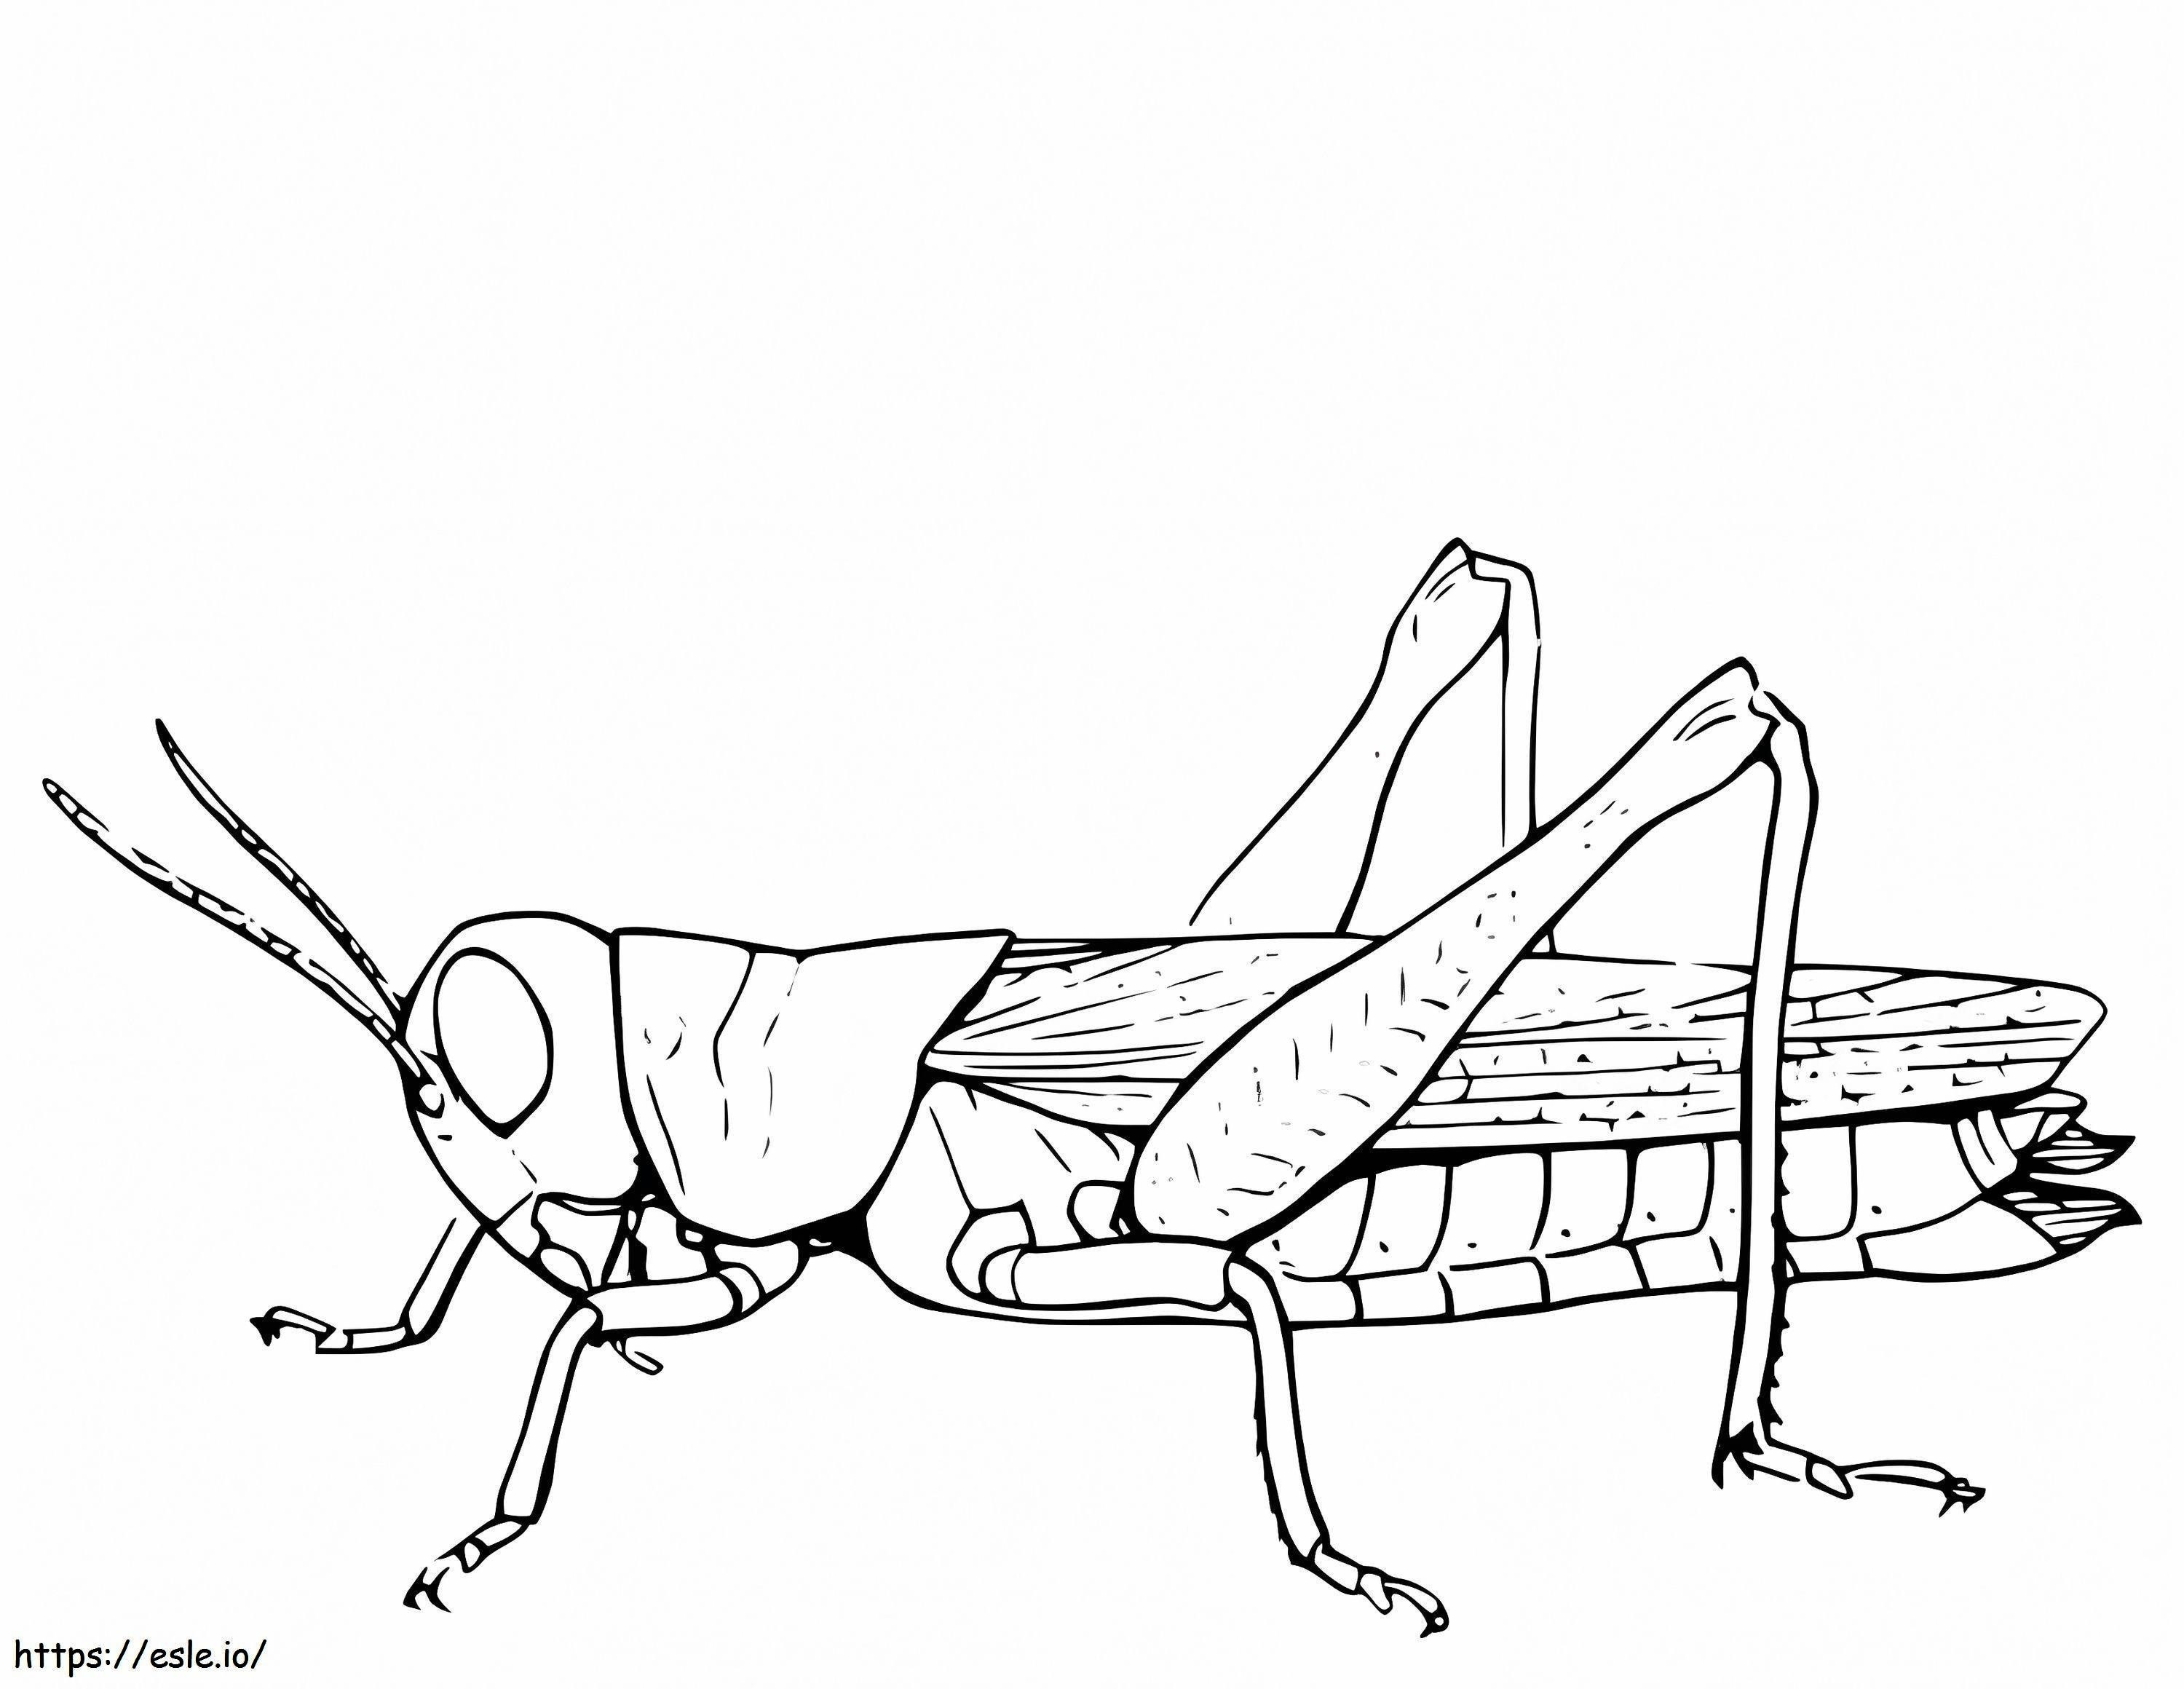 Great Grasshopper coloring page